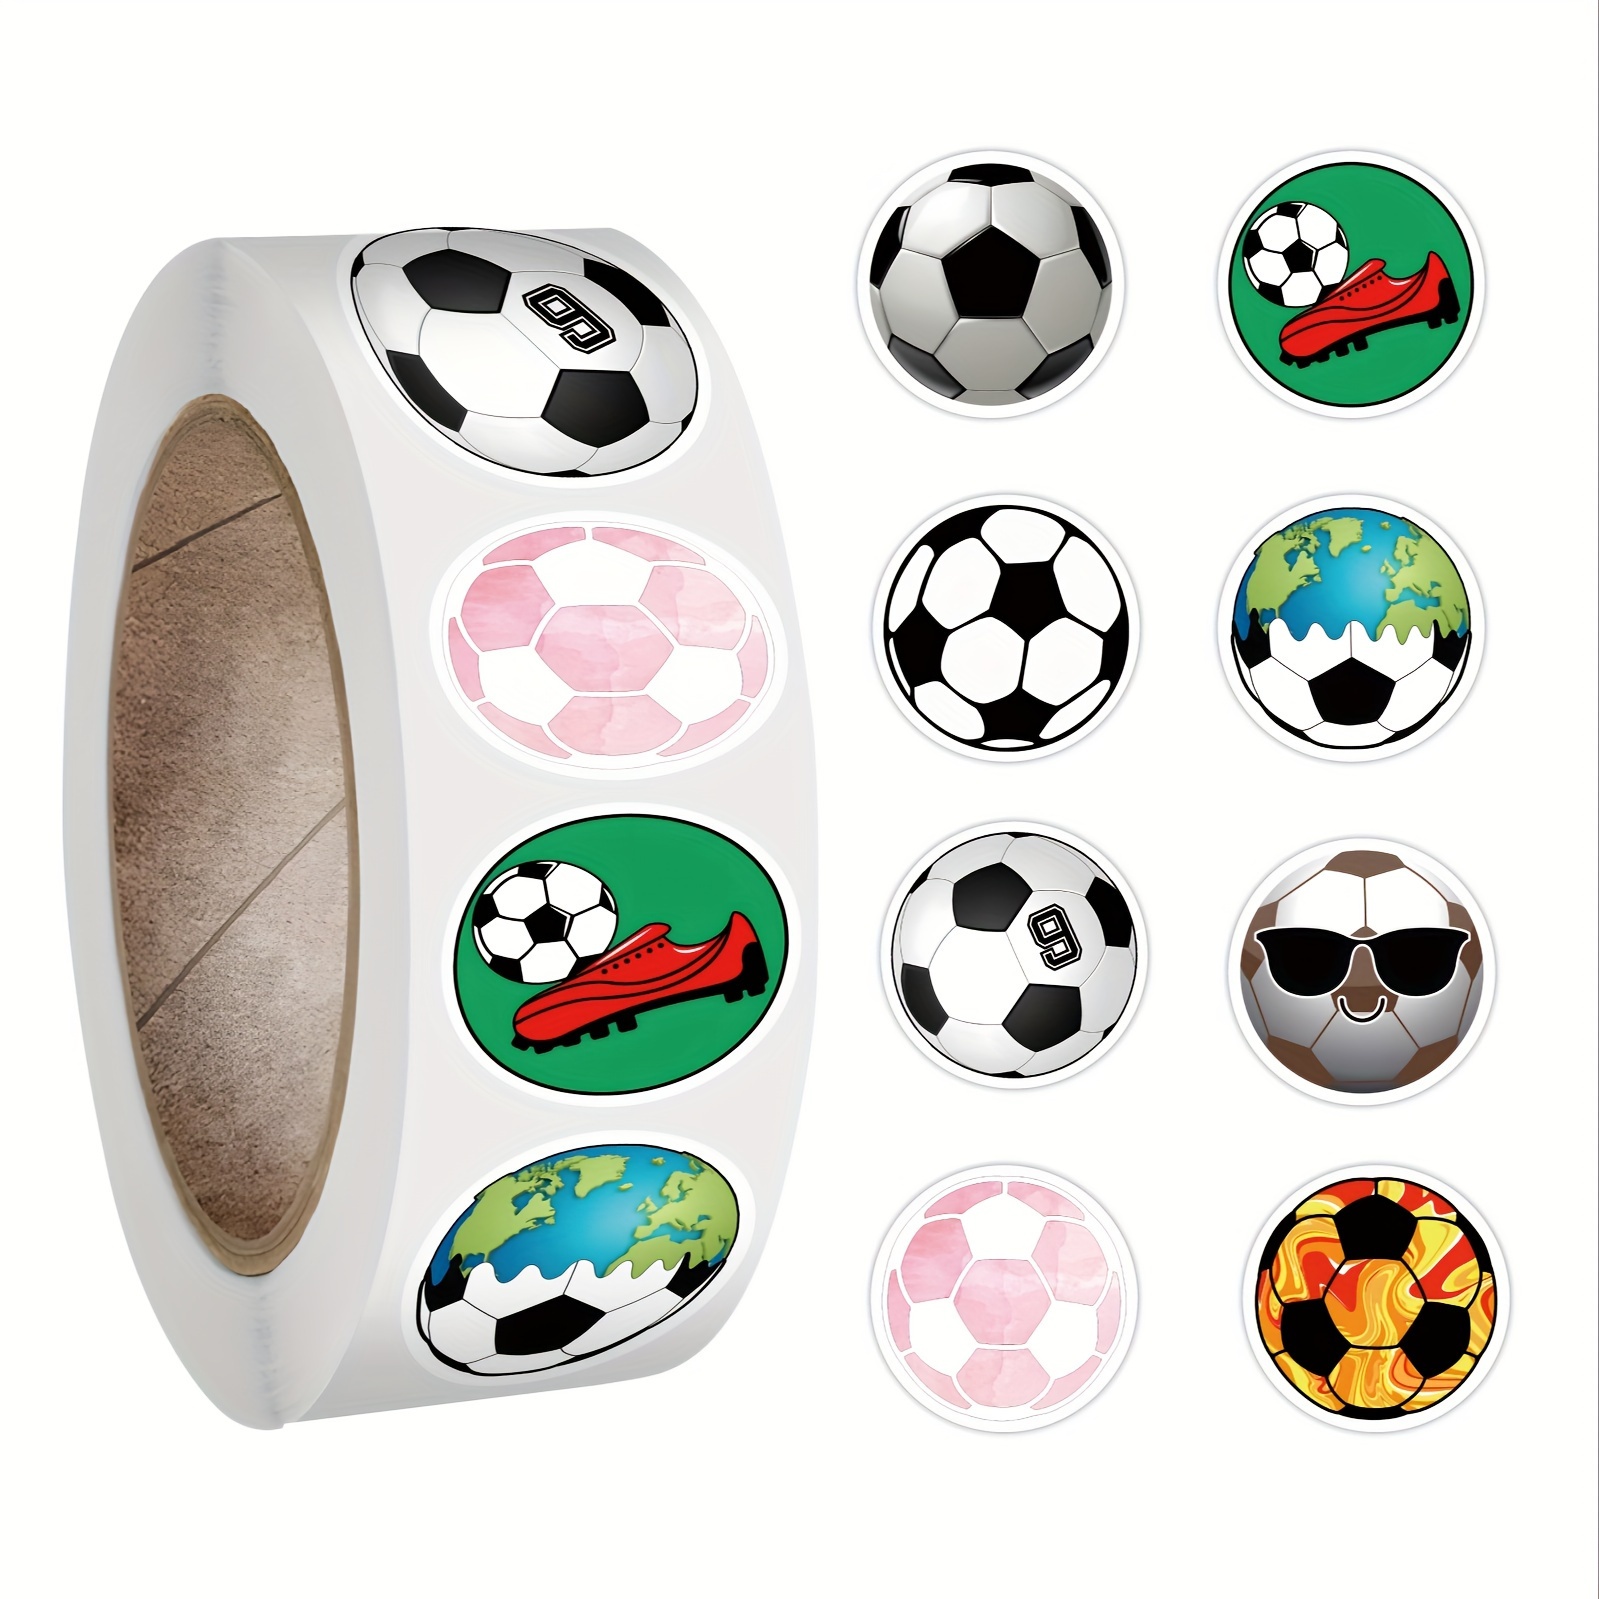 

500pcs/roll Soccer Stickers Roll Cute Vinyl Aesthetic Stickers For Water Bottle, Computer, Notebook, Luggage, Phone, Laptop Bike Skateboard